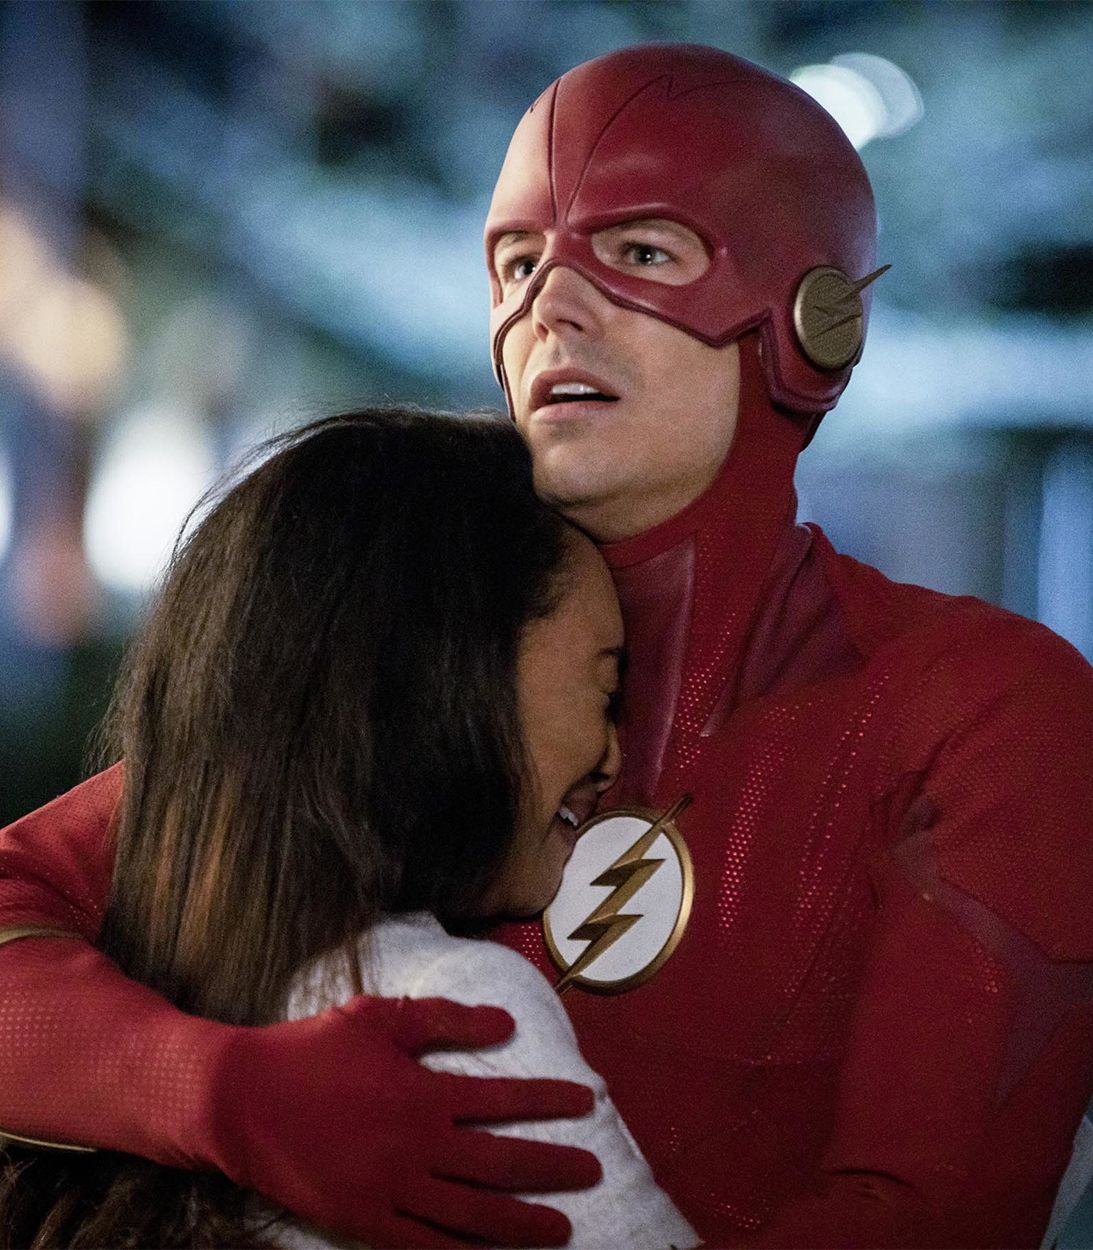 Iris crying in The Flash season 5 finale vertical